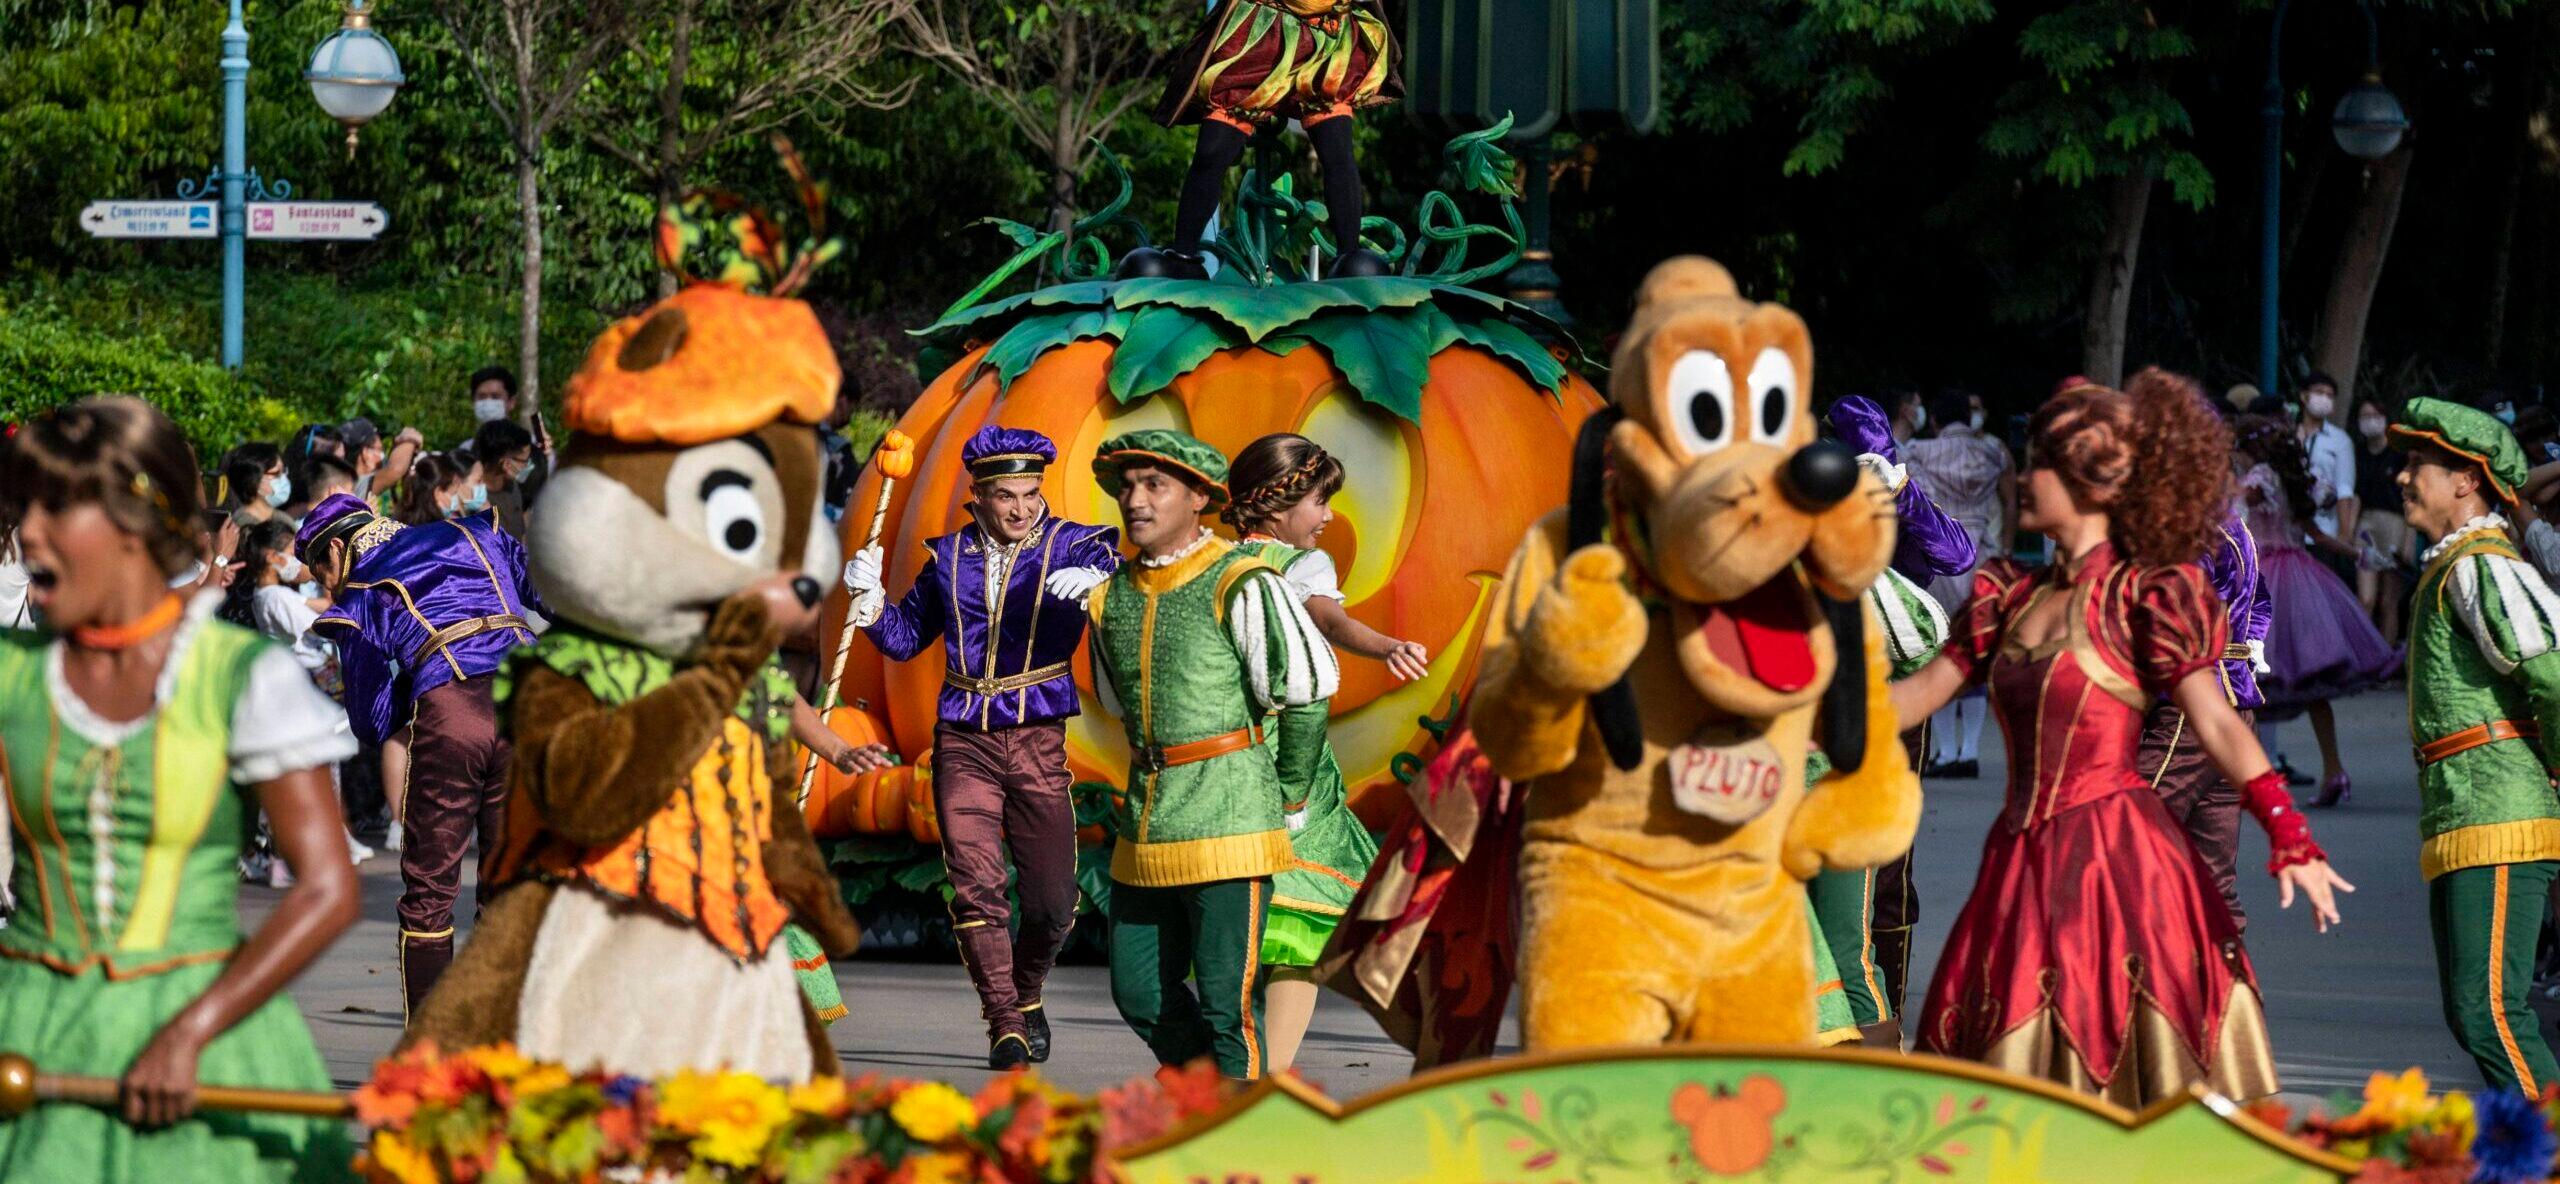 Disney Announces Dates And Details For Popular Halloween Event